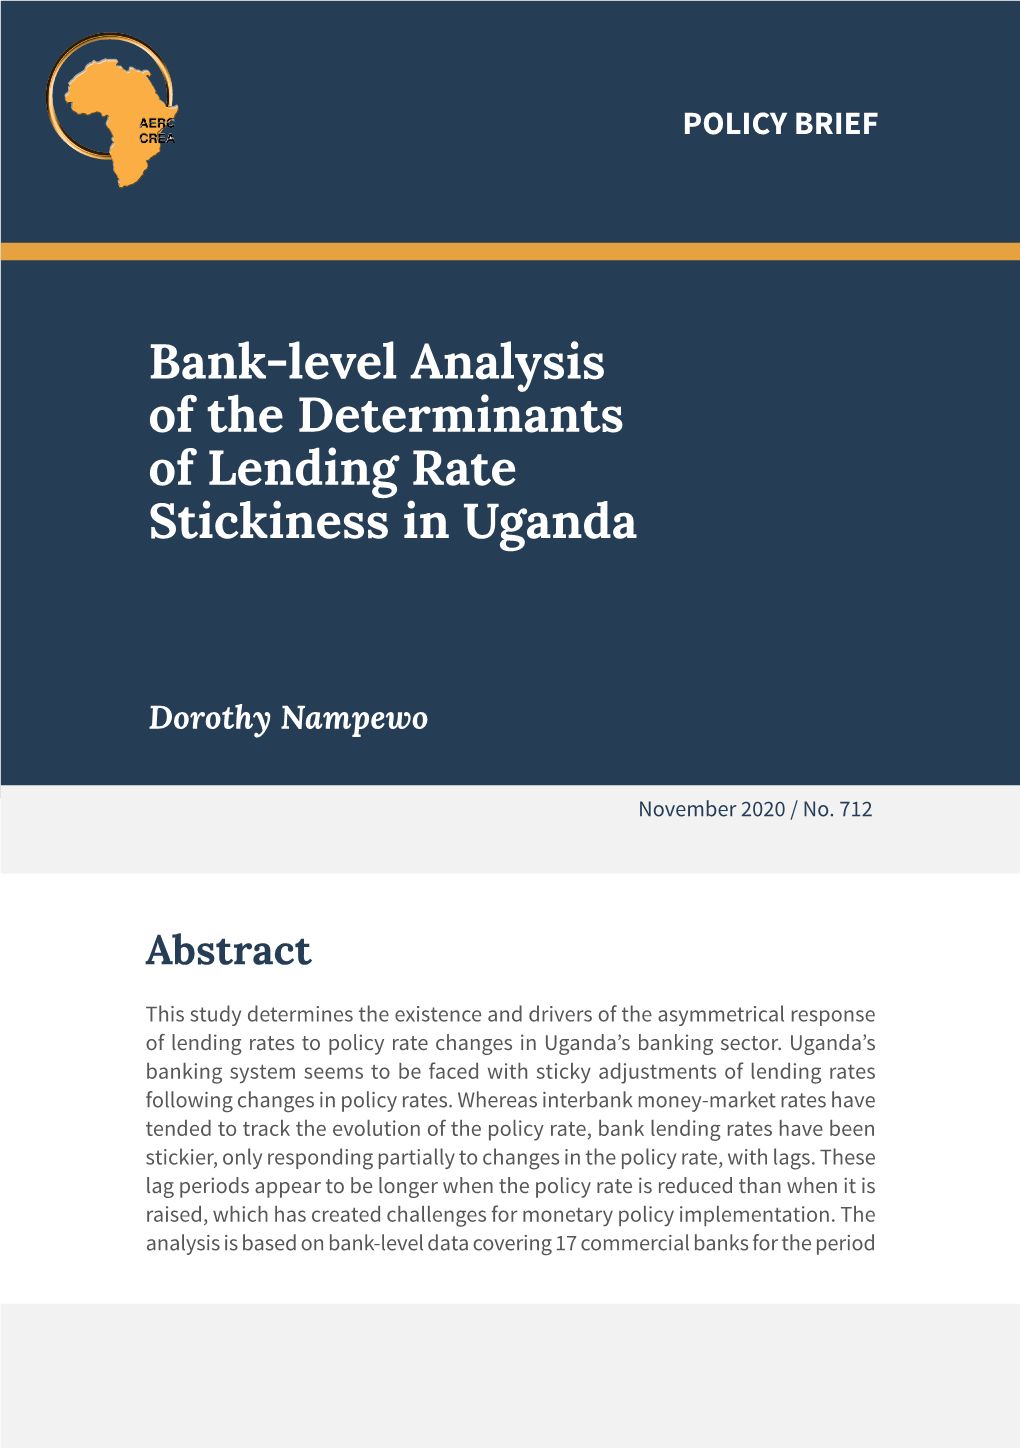 Bank-Level Analysis of the Determinants of Lending Rate Stickiness in Uganda